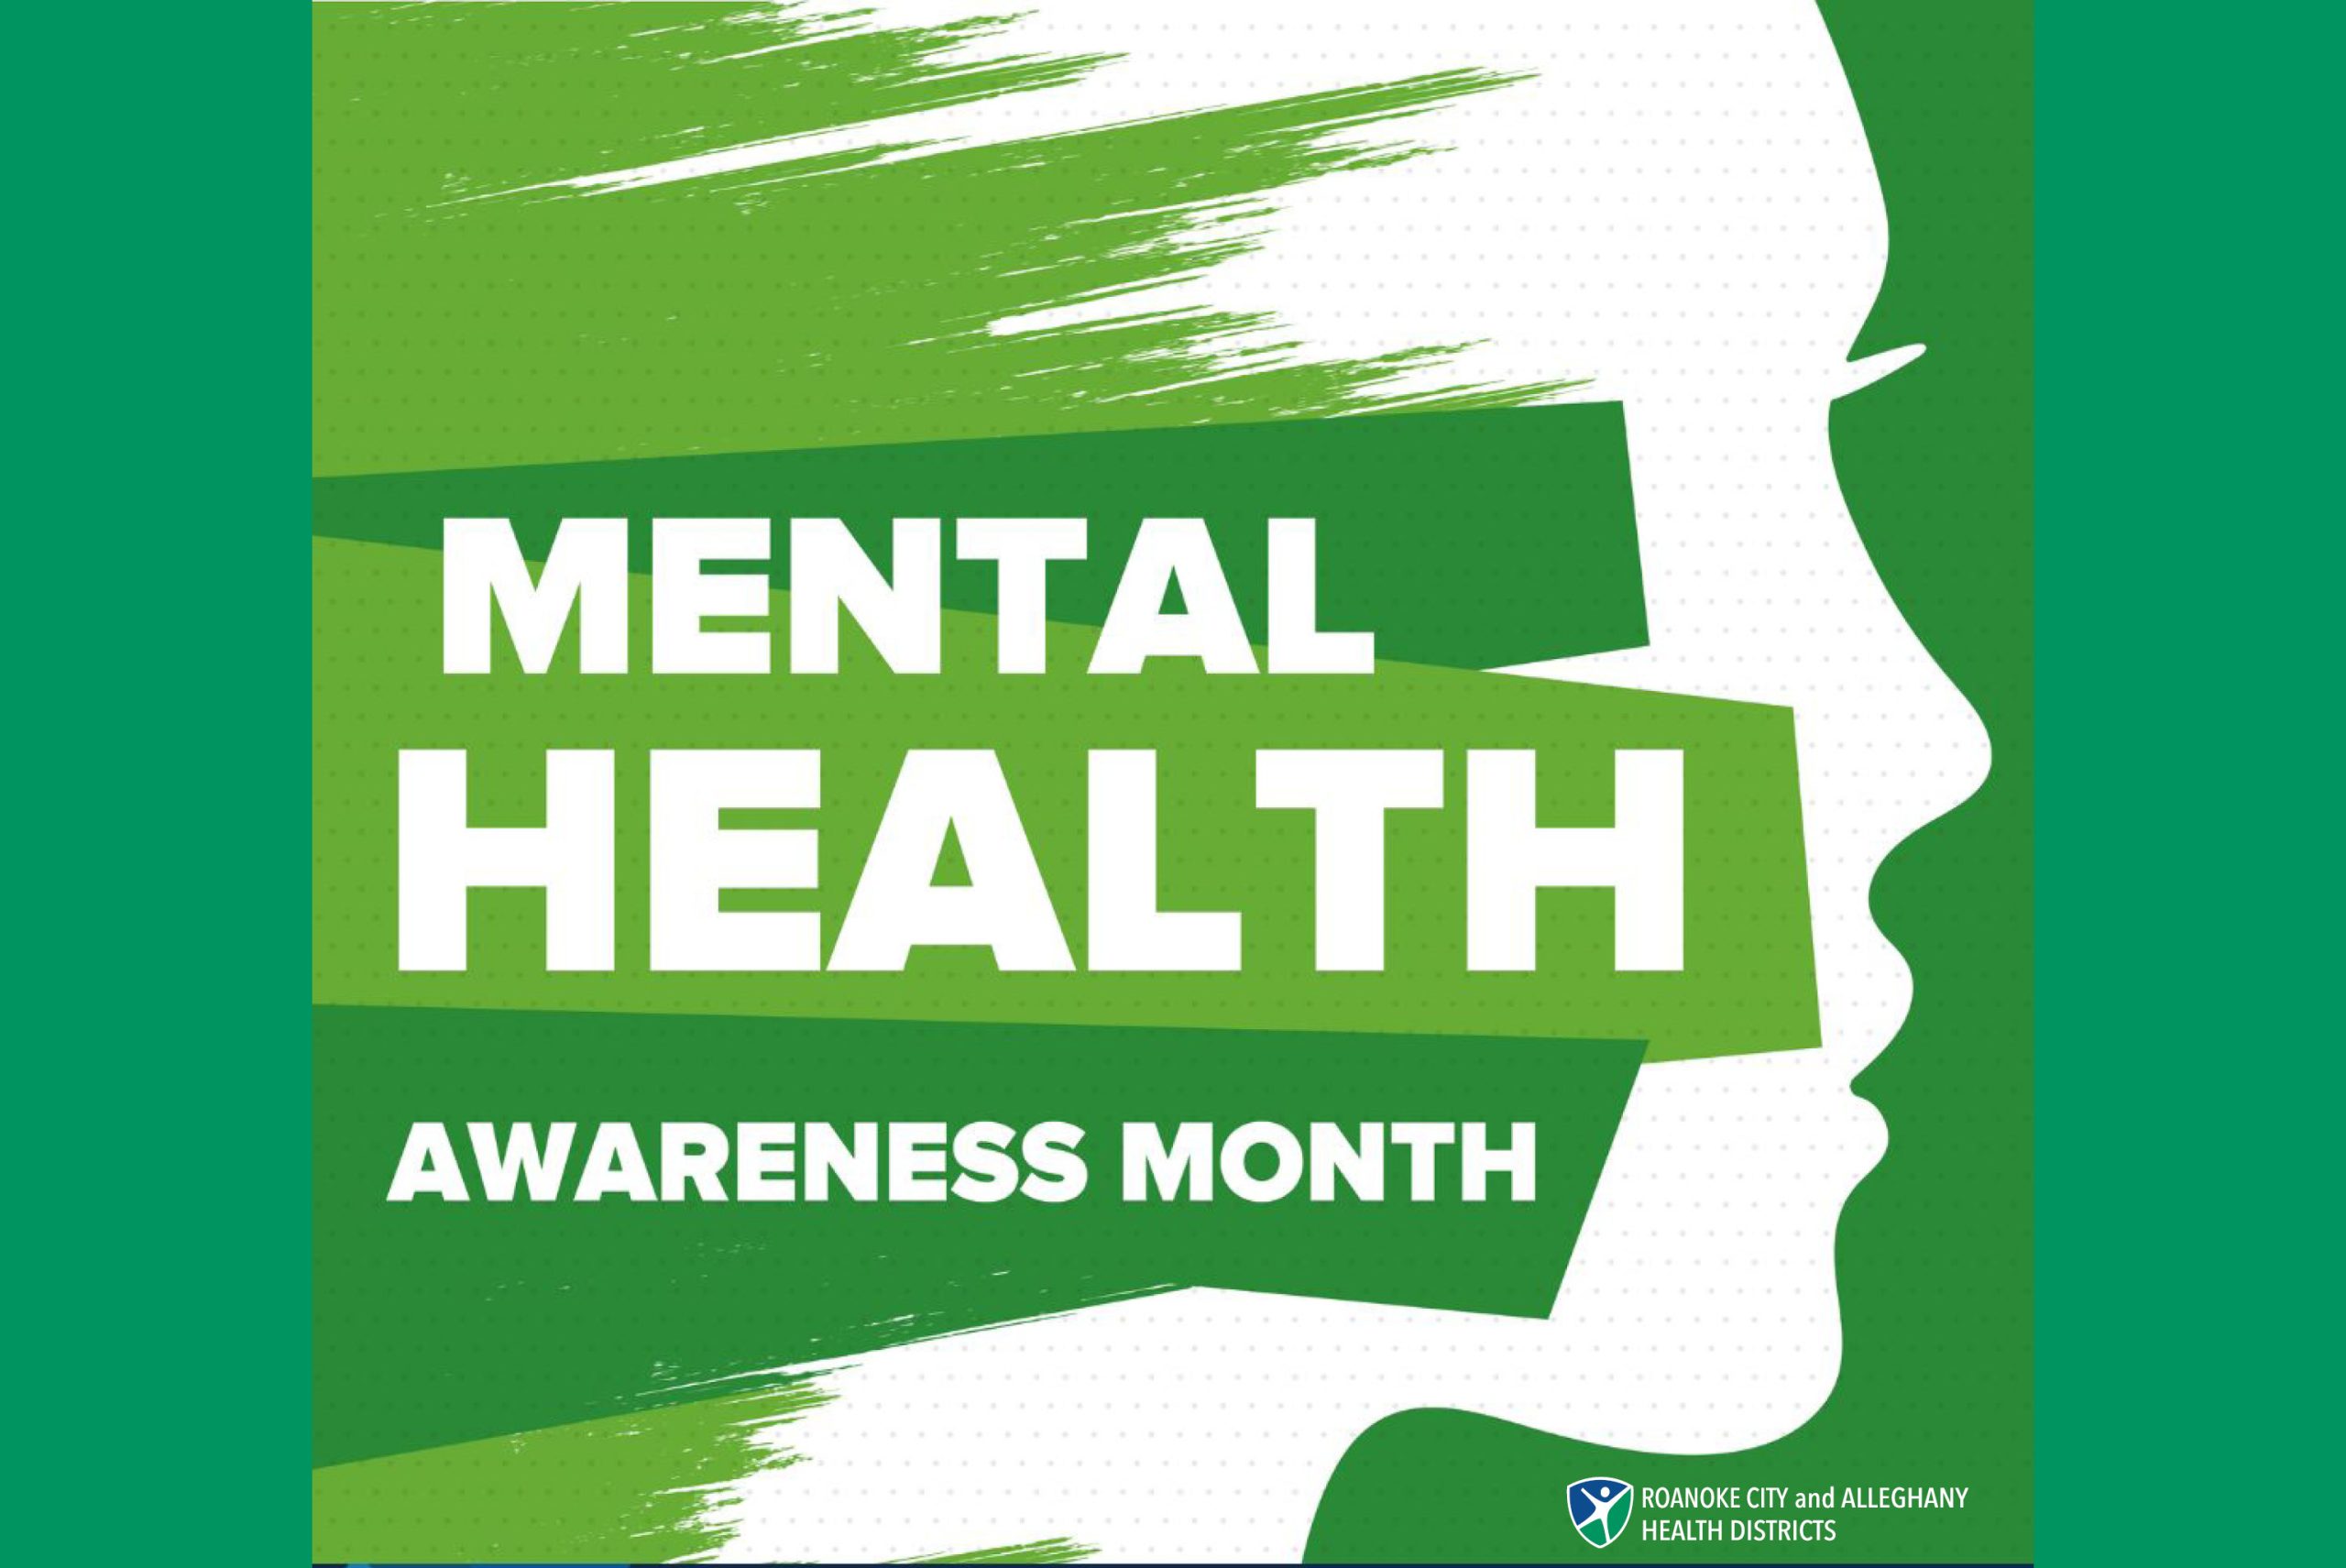 Green image with a stylized face that has the text Mental Health Awareness Month over it.